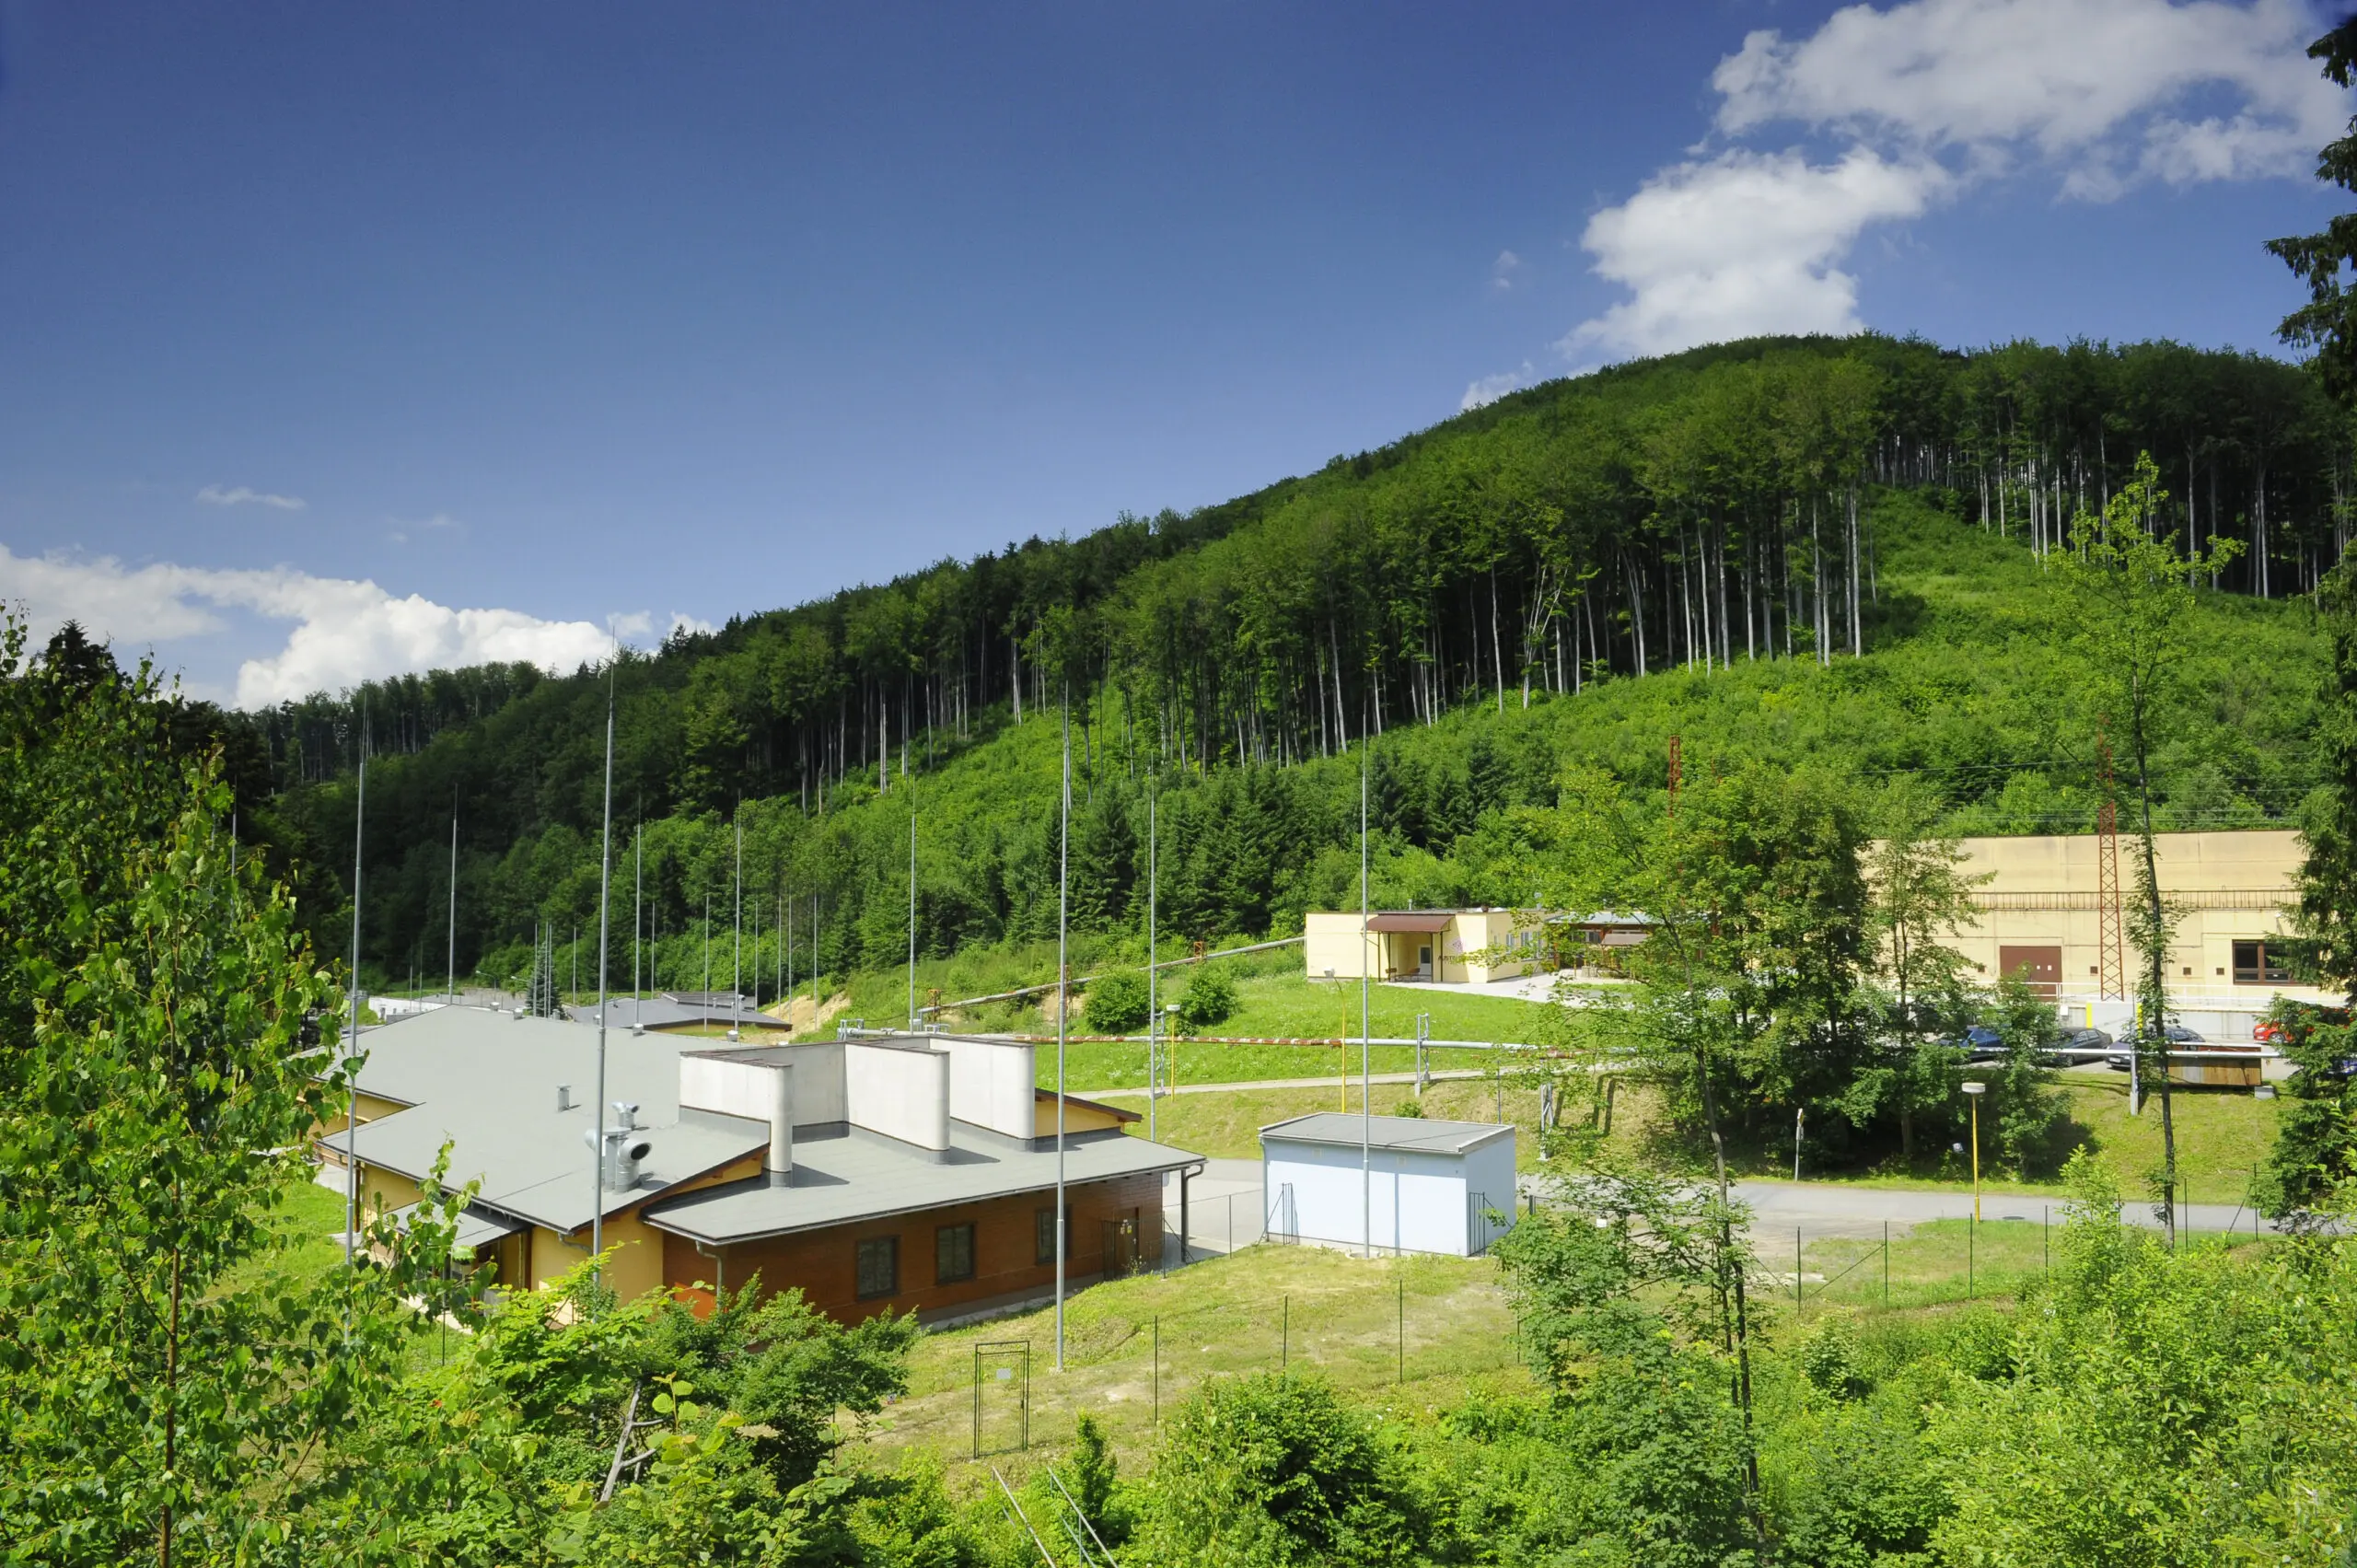 Production facility in wooded area